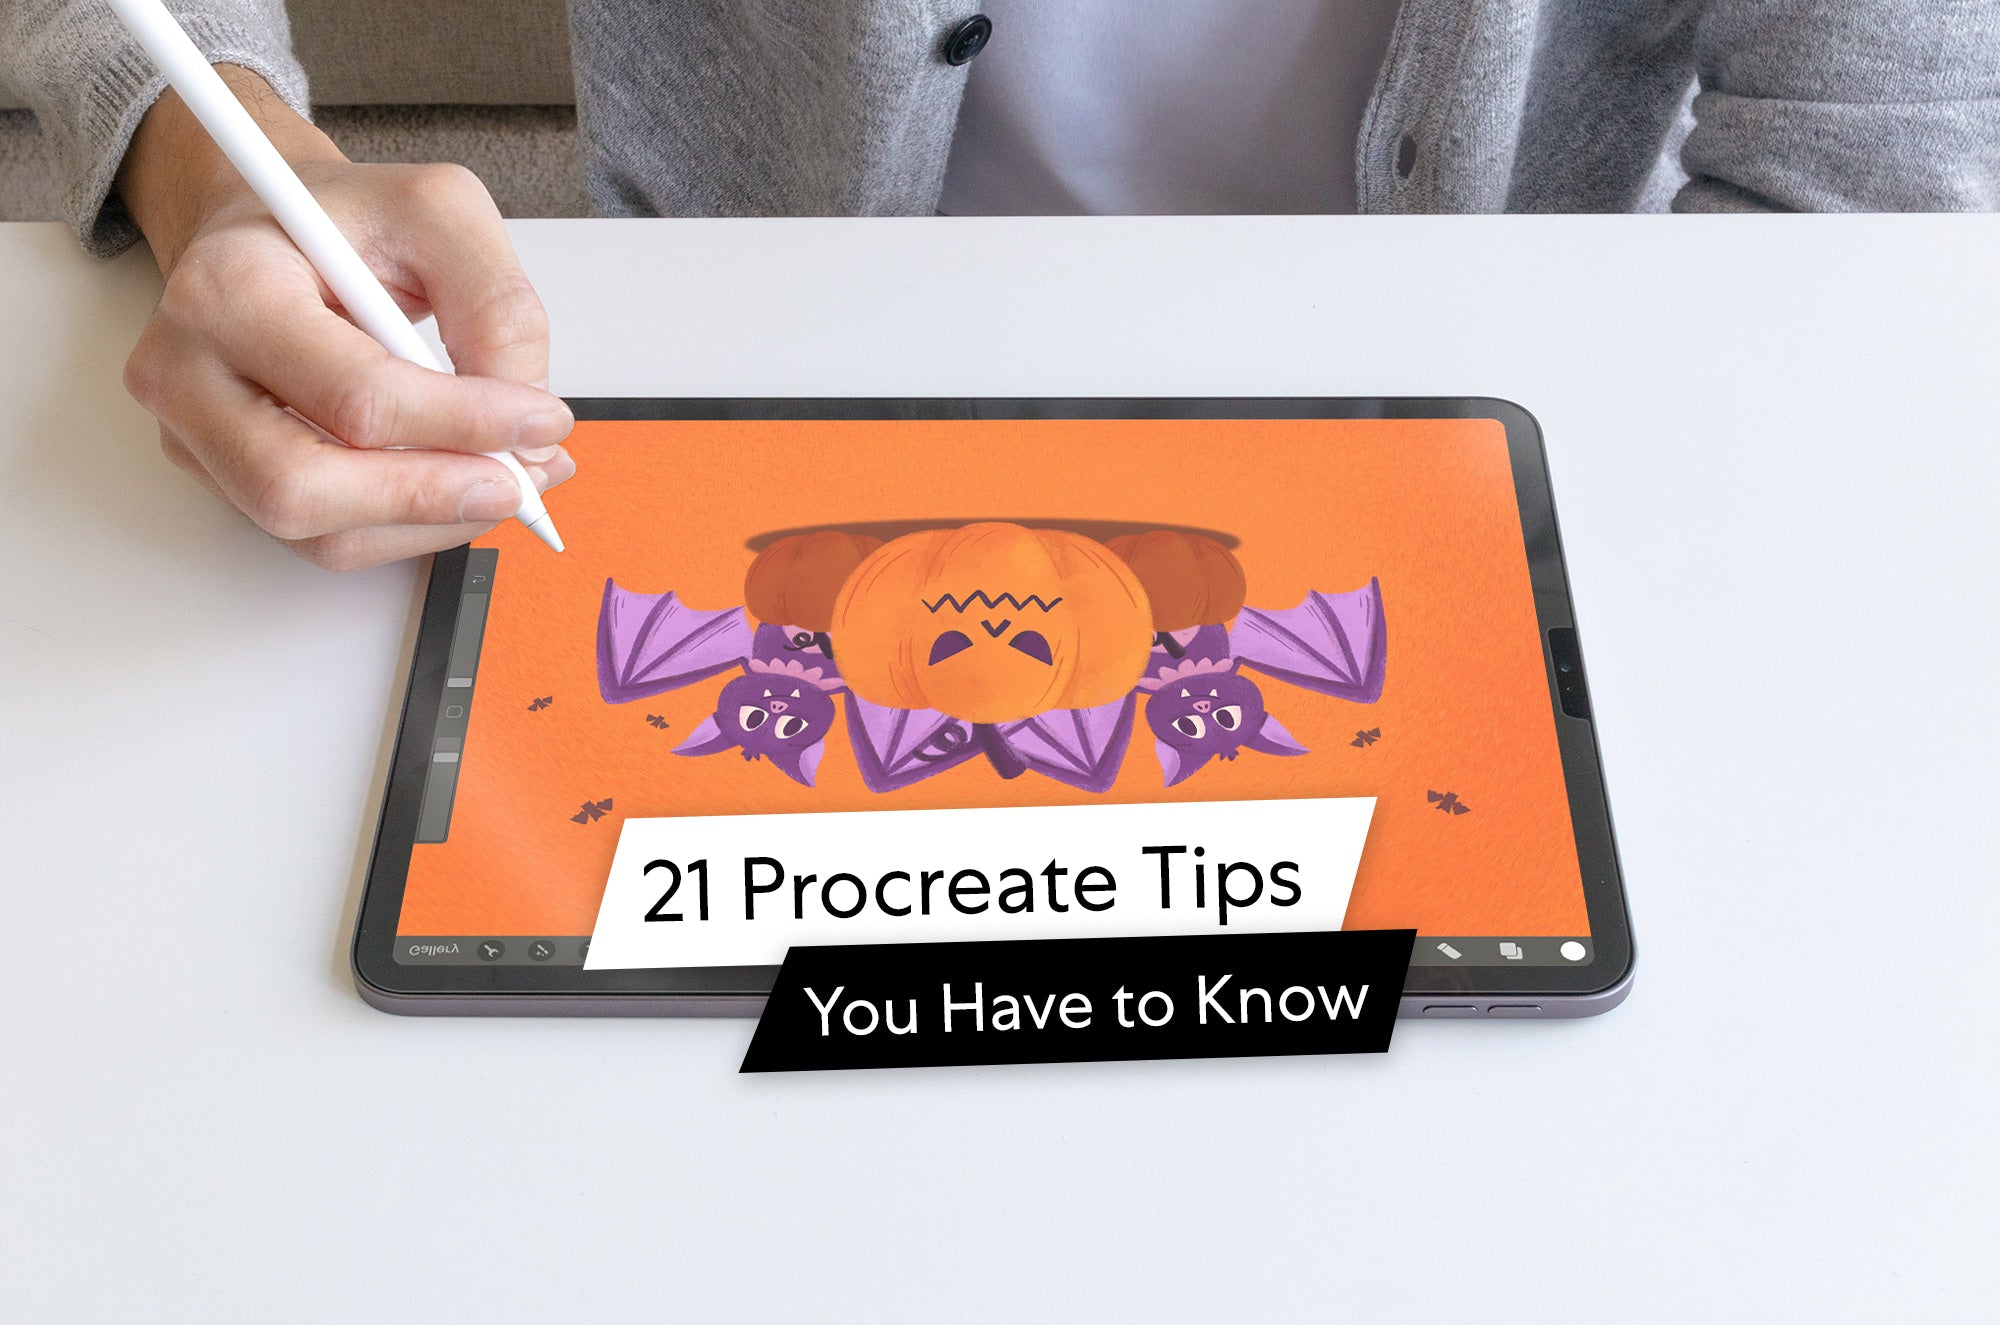 21 Procreate Tips You Have to Know